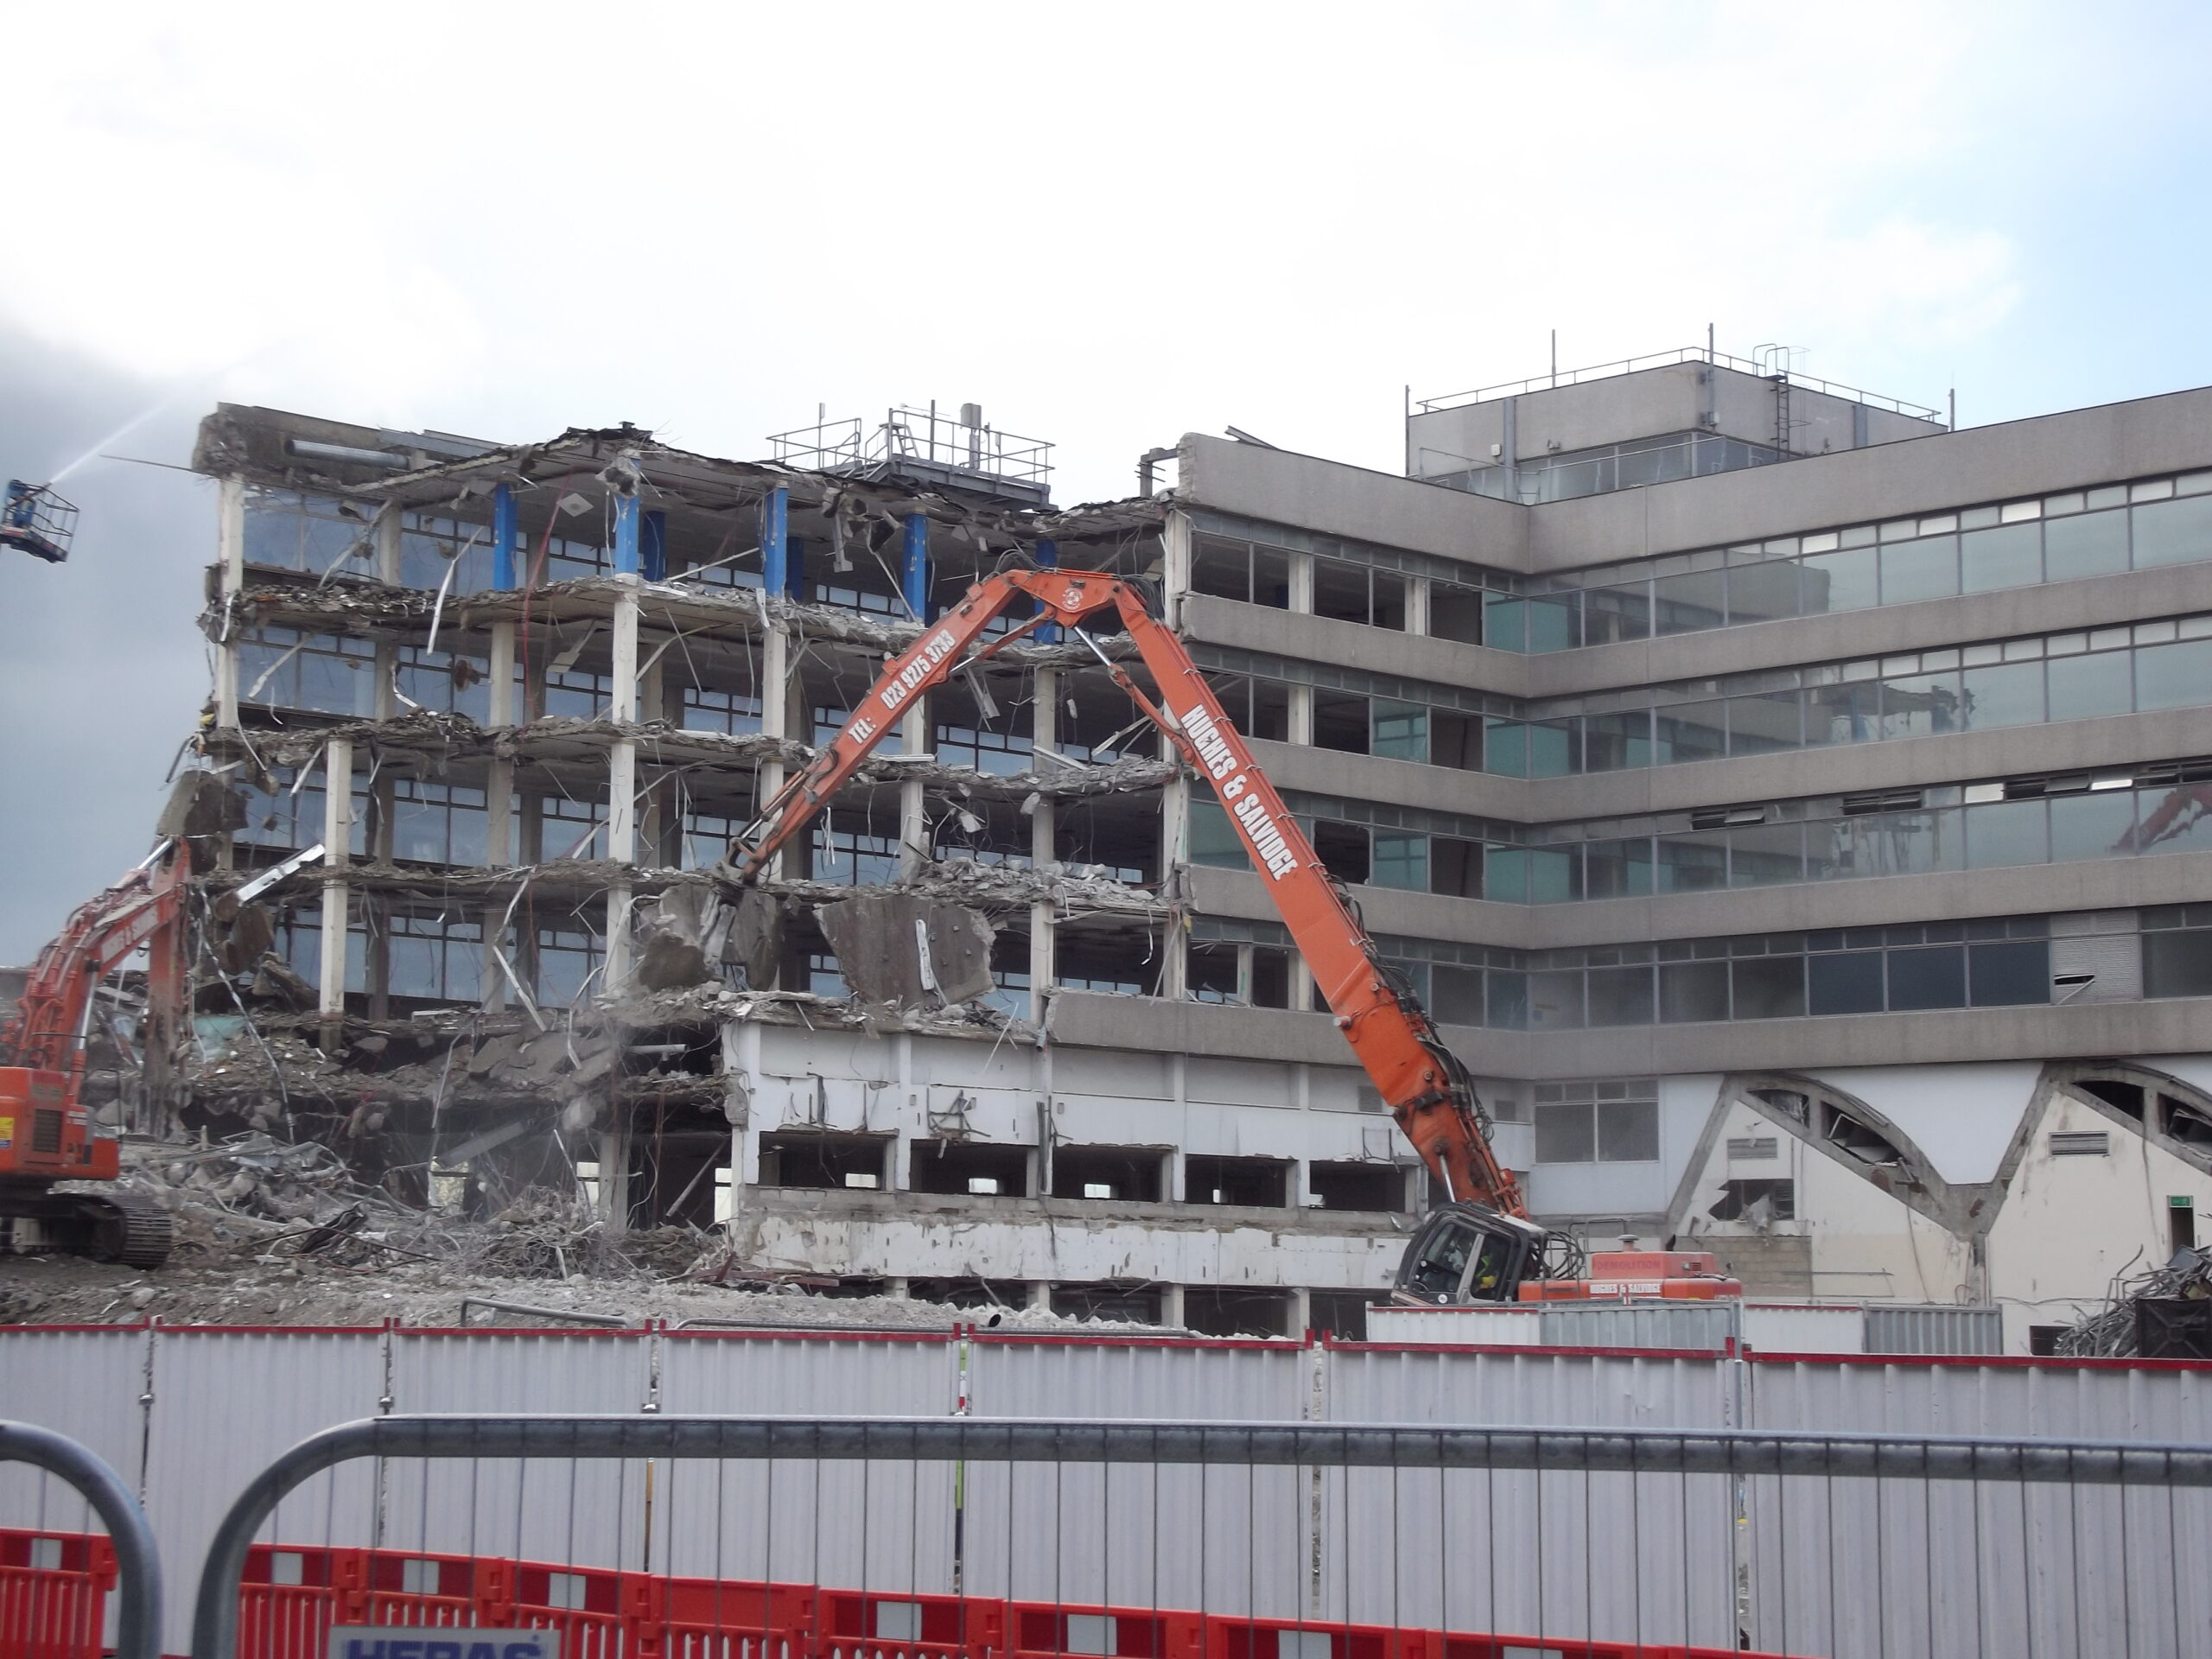 Demolition of B-C spur seen from Compass House